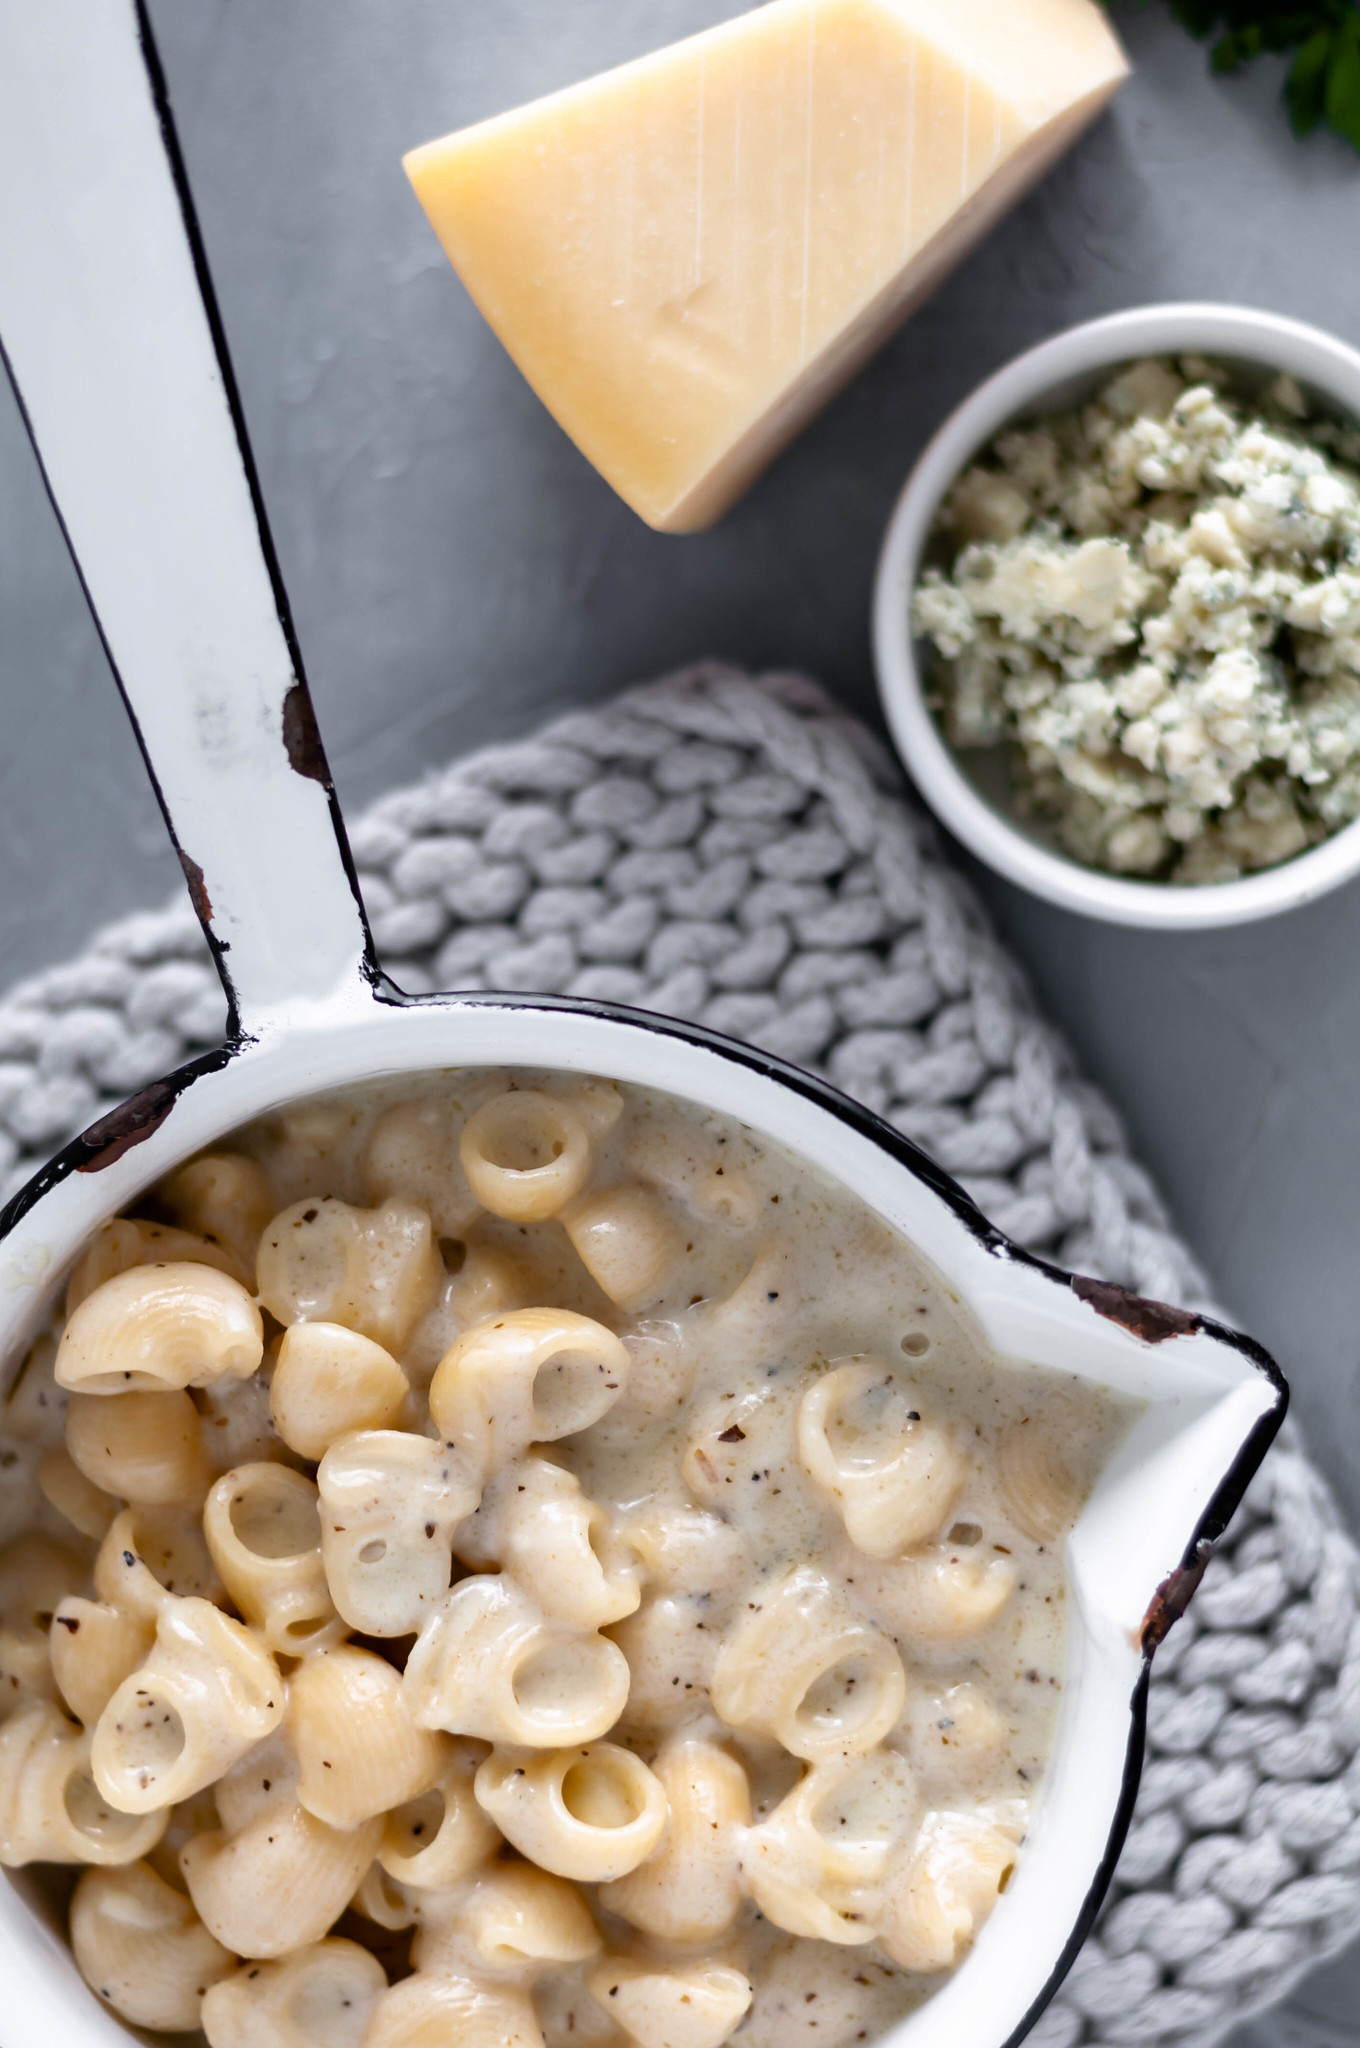 This Italian Mac and Cheese is the creamiest, cheesiest pasta around. Perfectly al dente pasta tossed in a sauce packed with several Italian cheeses and Italian seasonings.